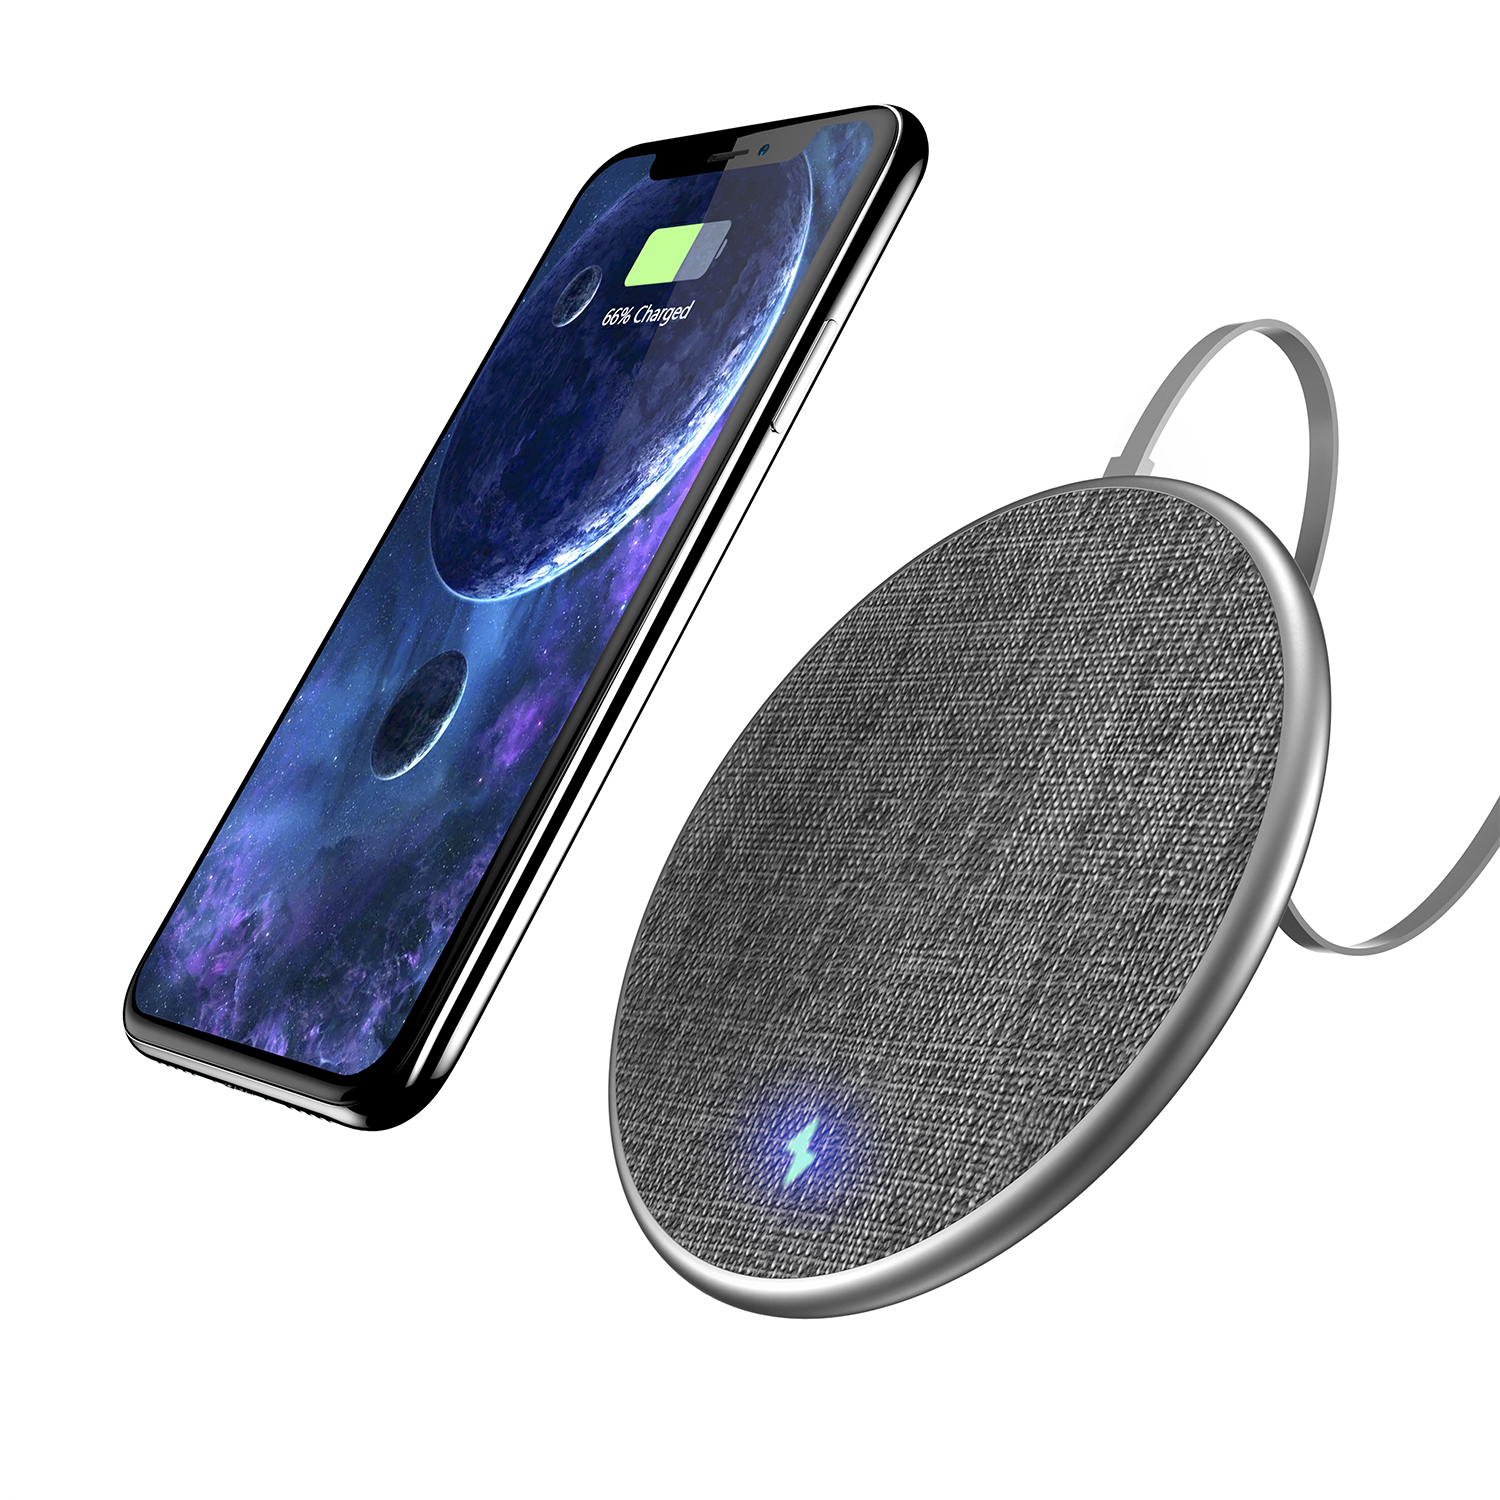 Some changes brought by wireless charger